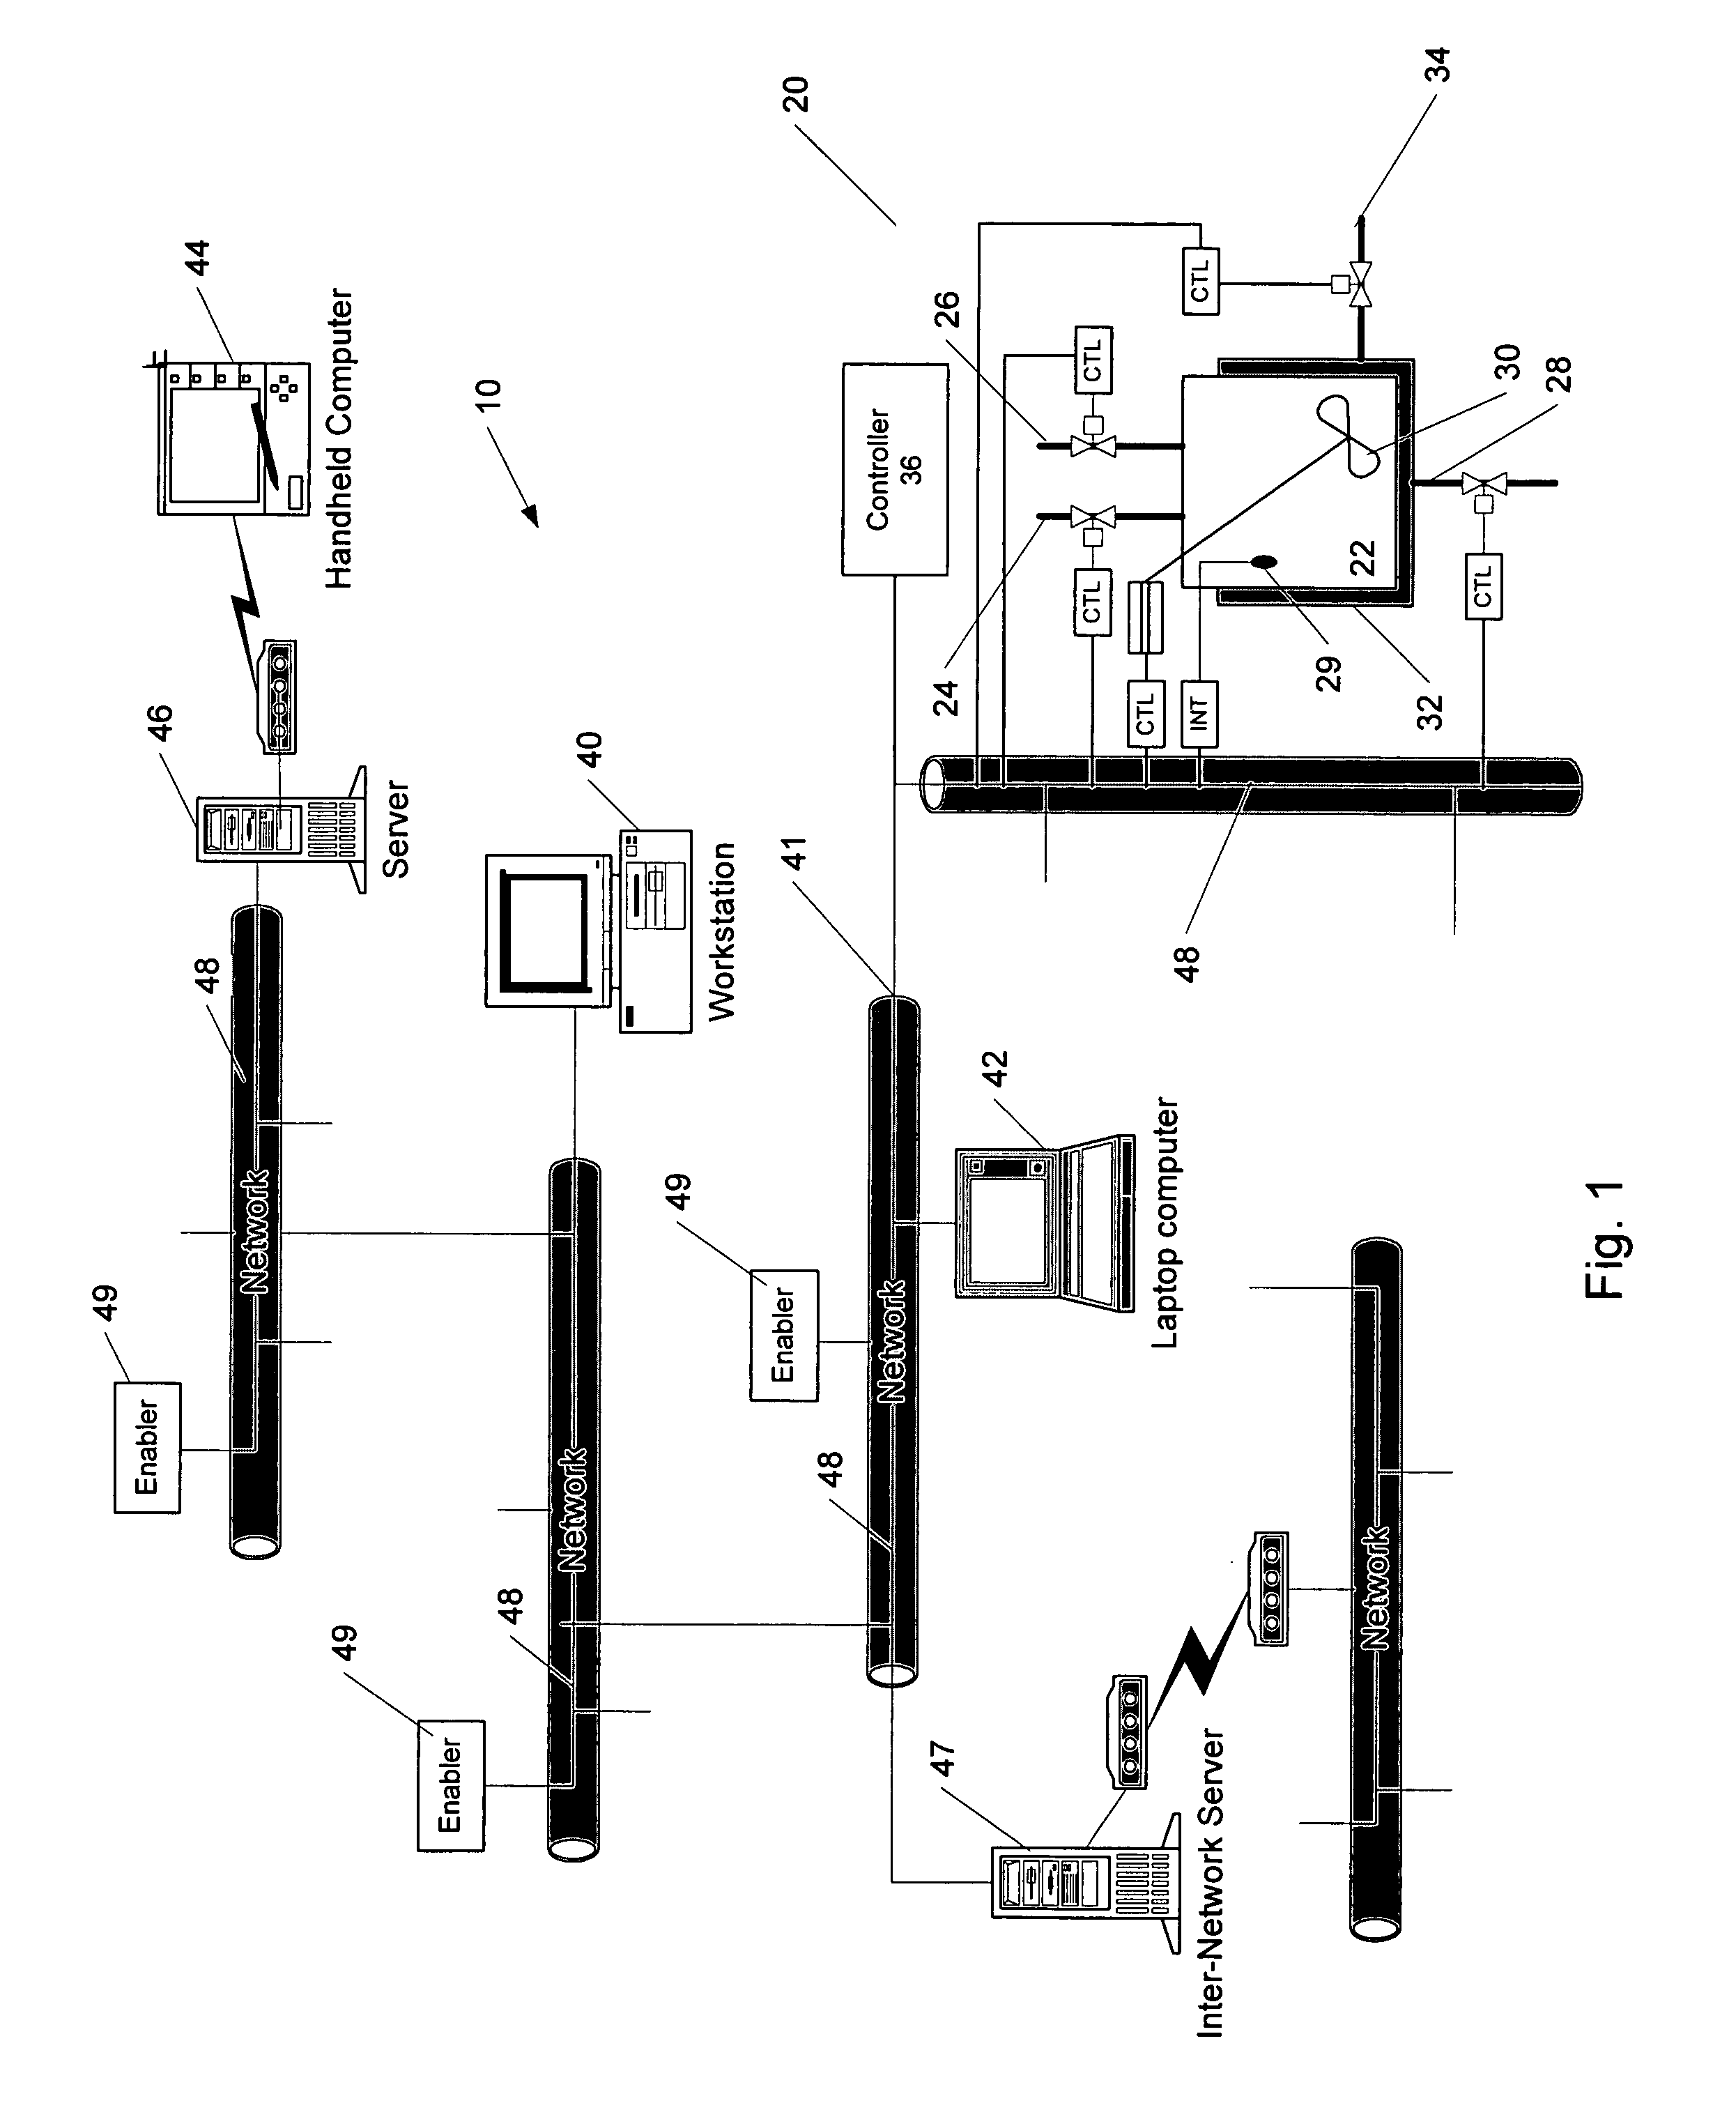 Methods and apparatus for control using control devices that provide a virtual machine environment and that communicate via an IP network